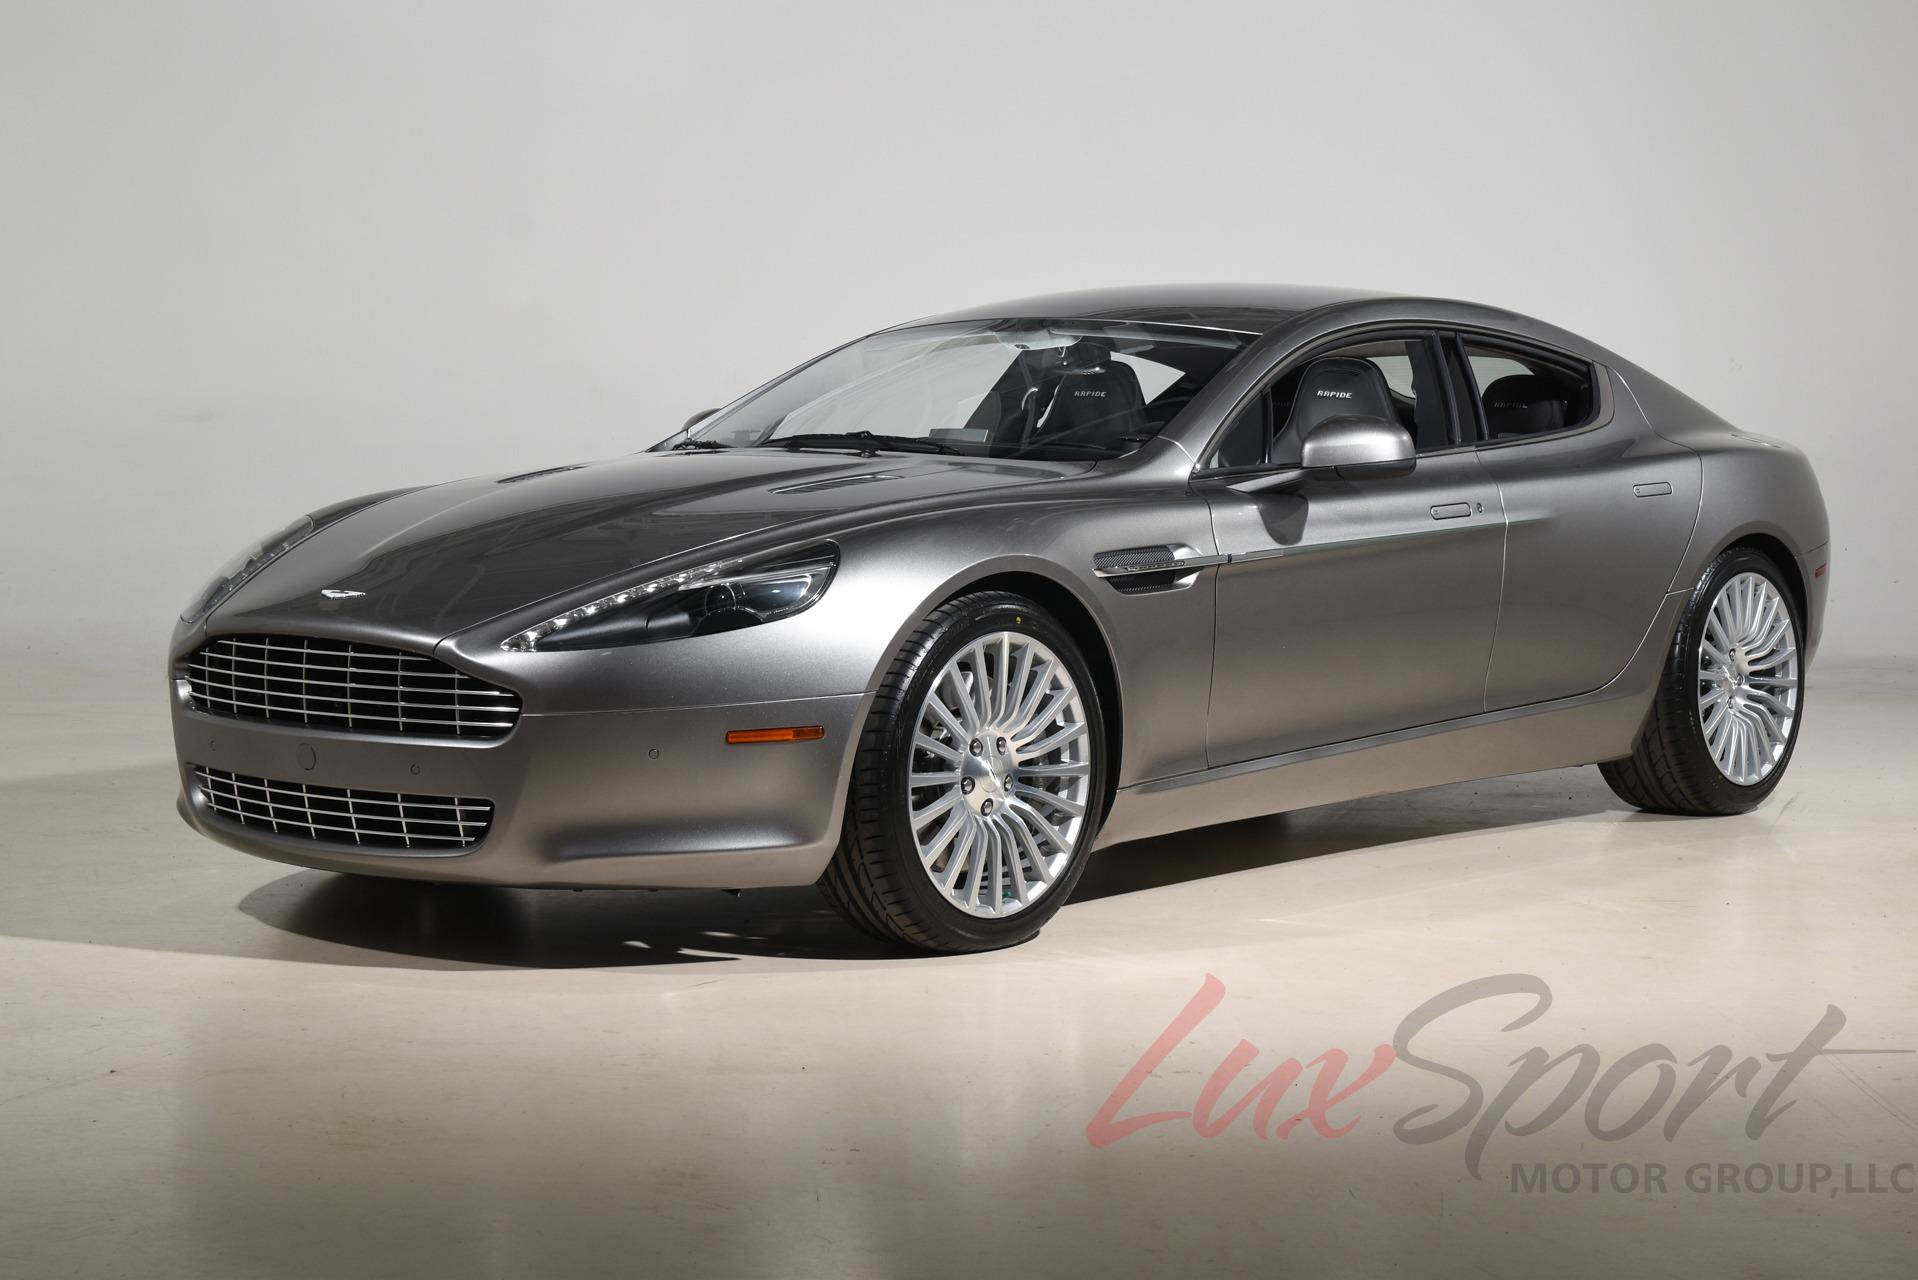 Used Aston Martin Rapide for Sale Near Me in Yonkers, NY - Autotrader